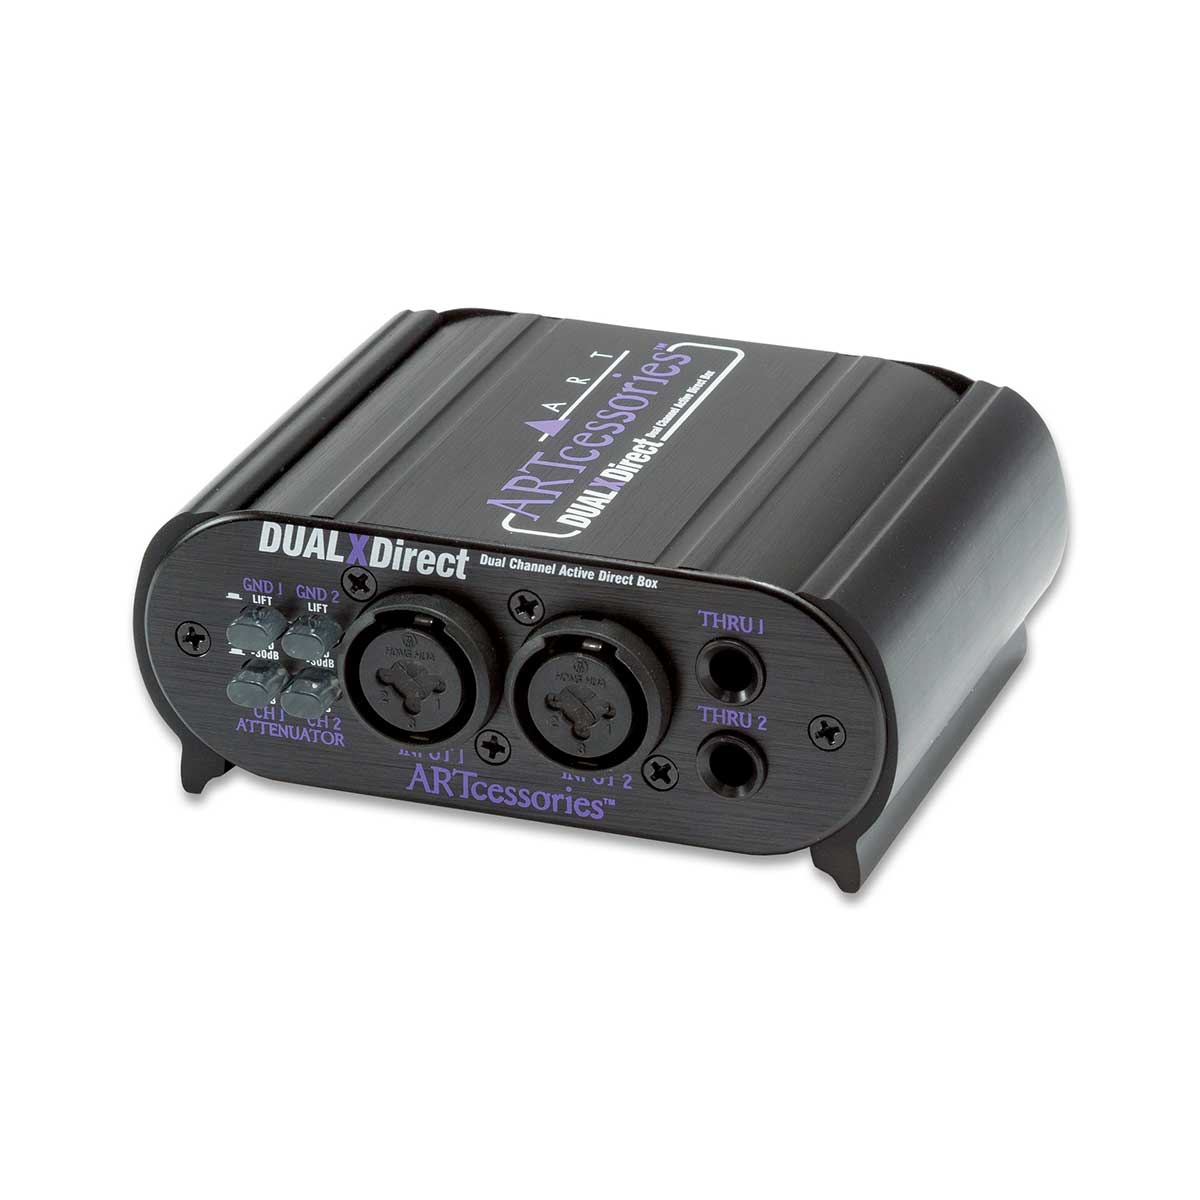 ART DUALXDirect Dual Channel Active Direct Box